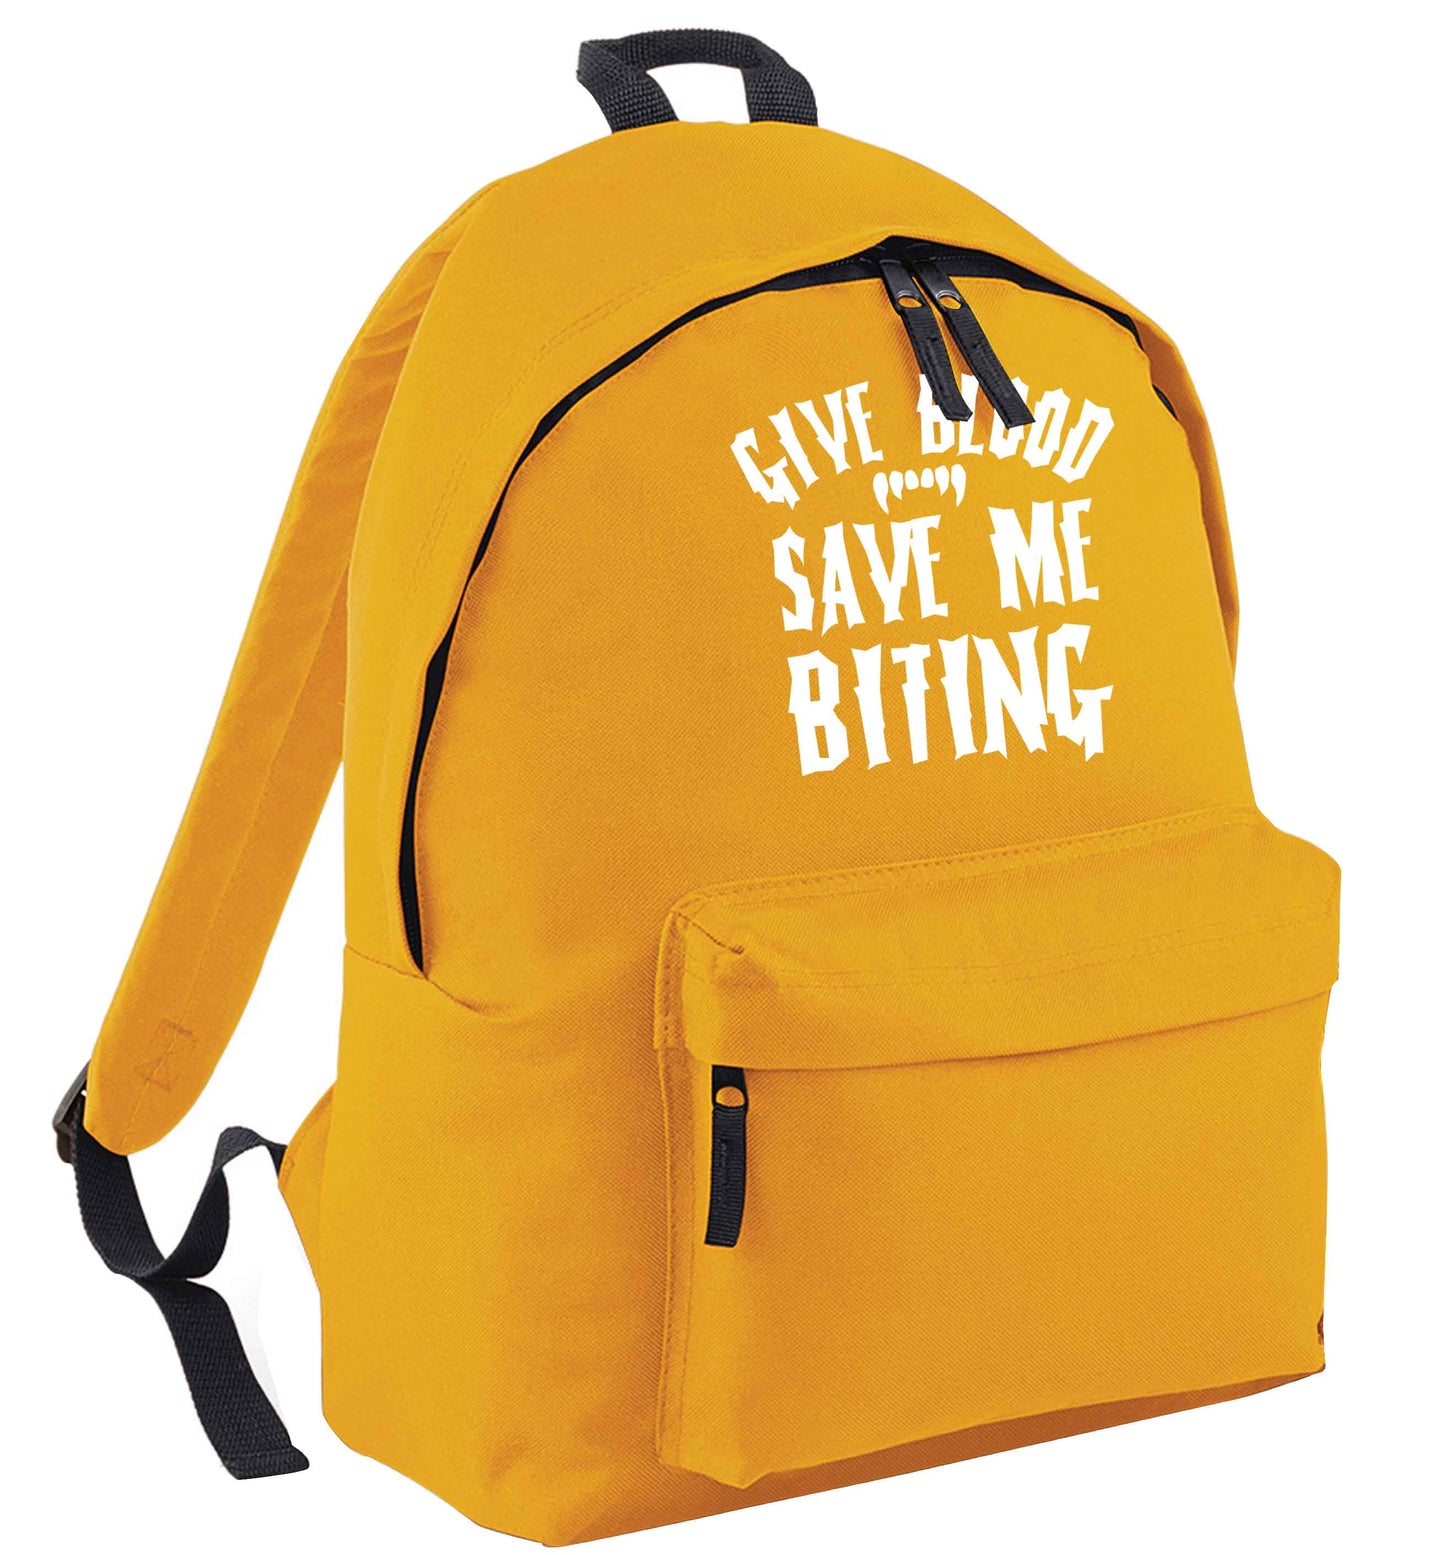 Give blood save me biting mustard adults backpack